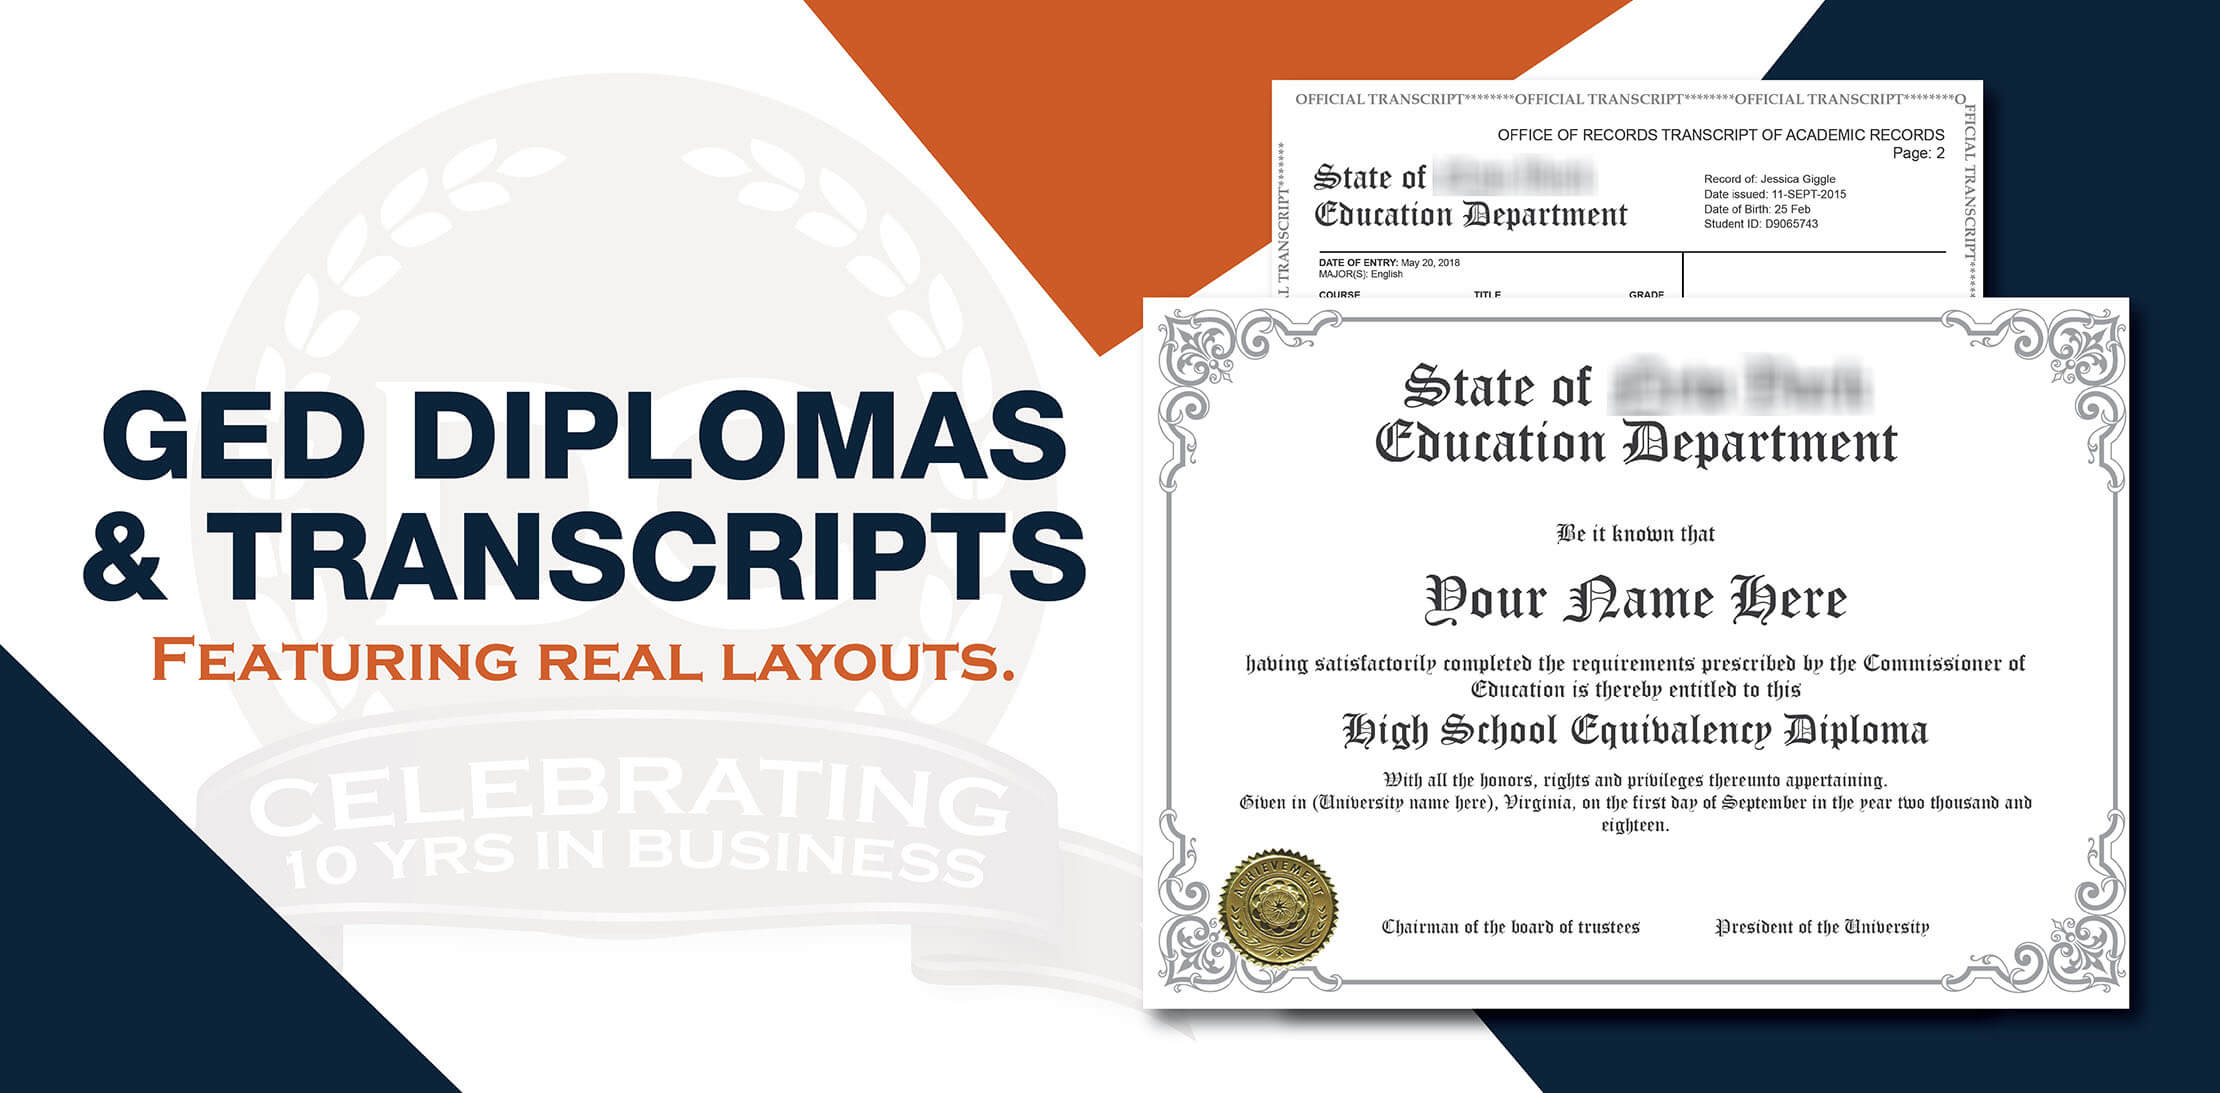 Buy a fake GED diploma and transcript sets. Save 20% today! 100% custom-made and delivered quick! Only print shop with real embossed text and raised seals!
